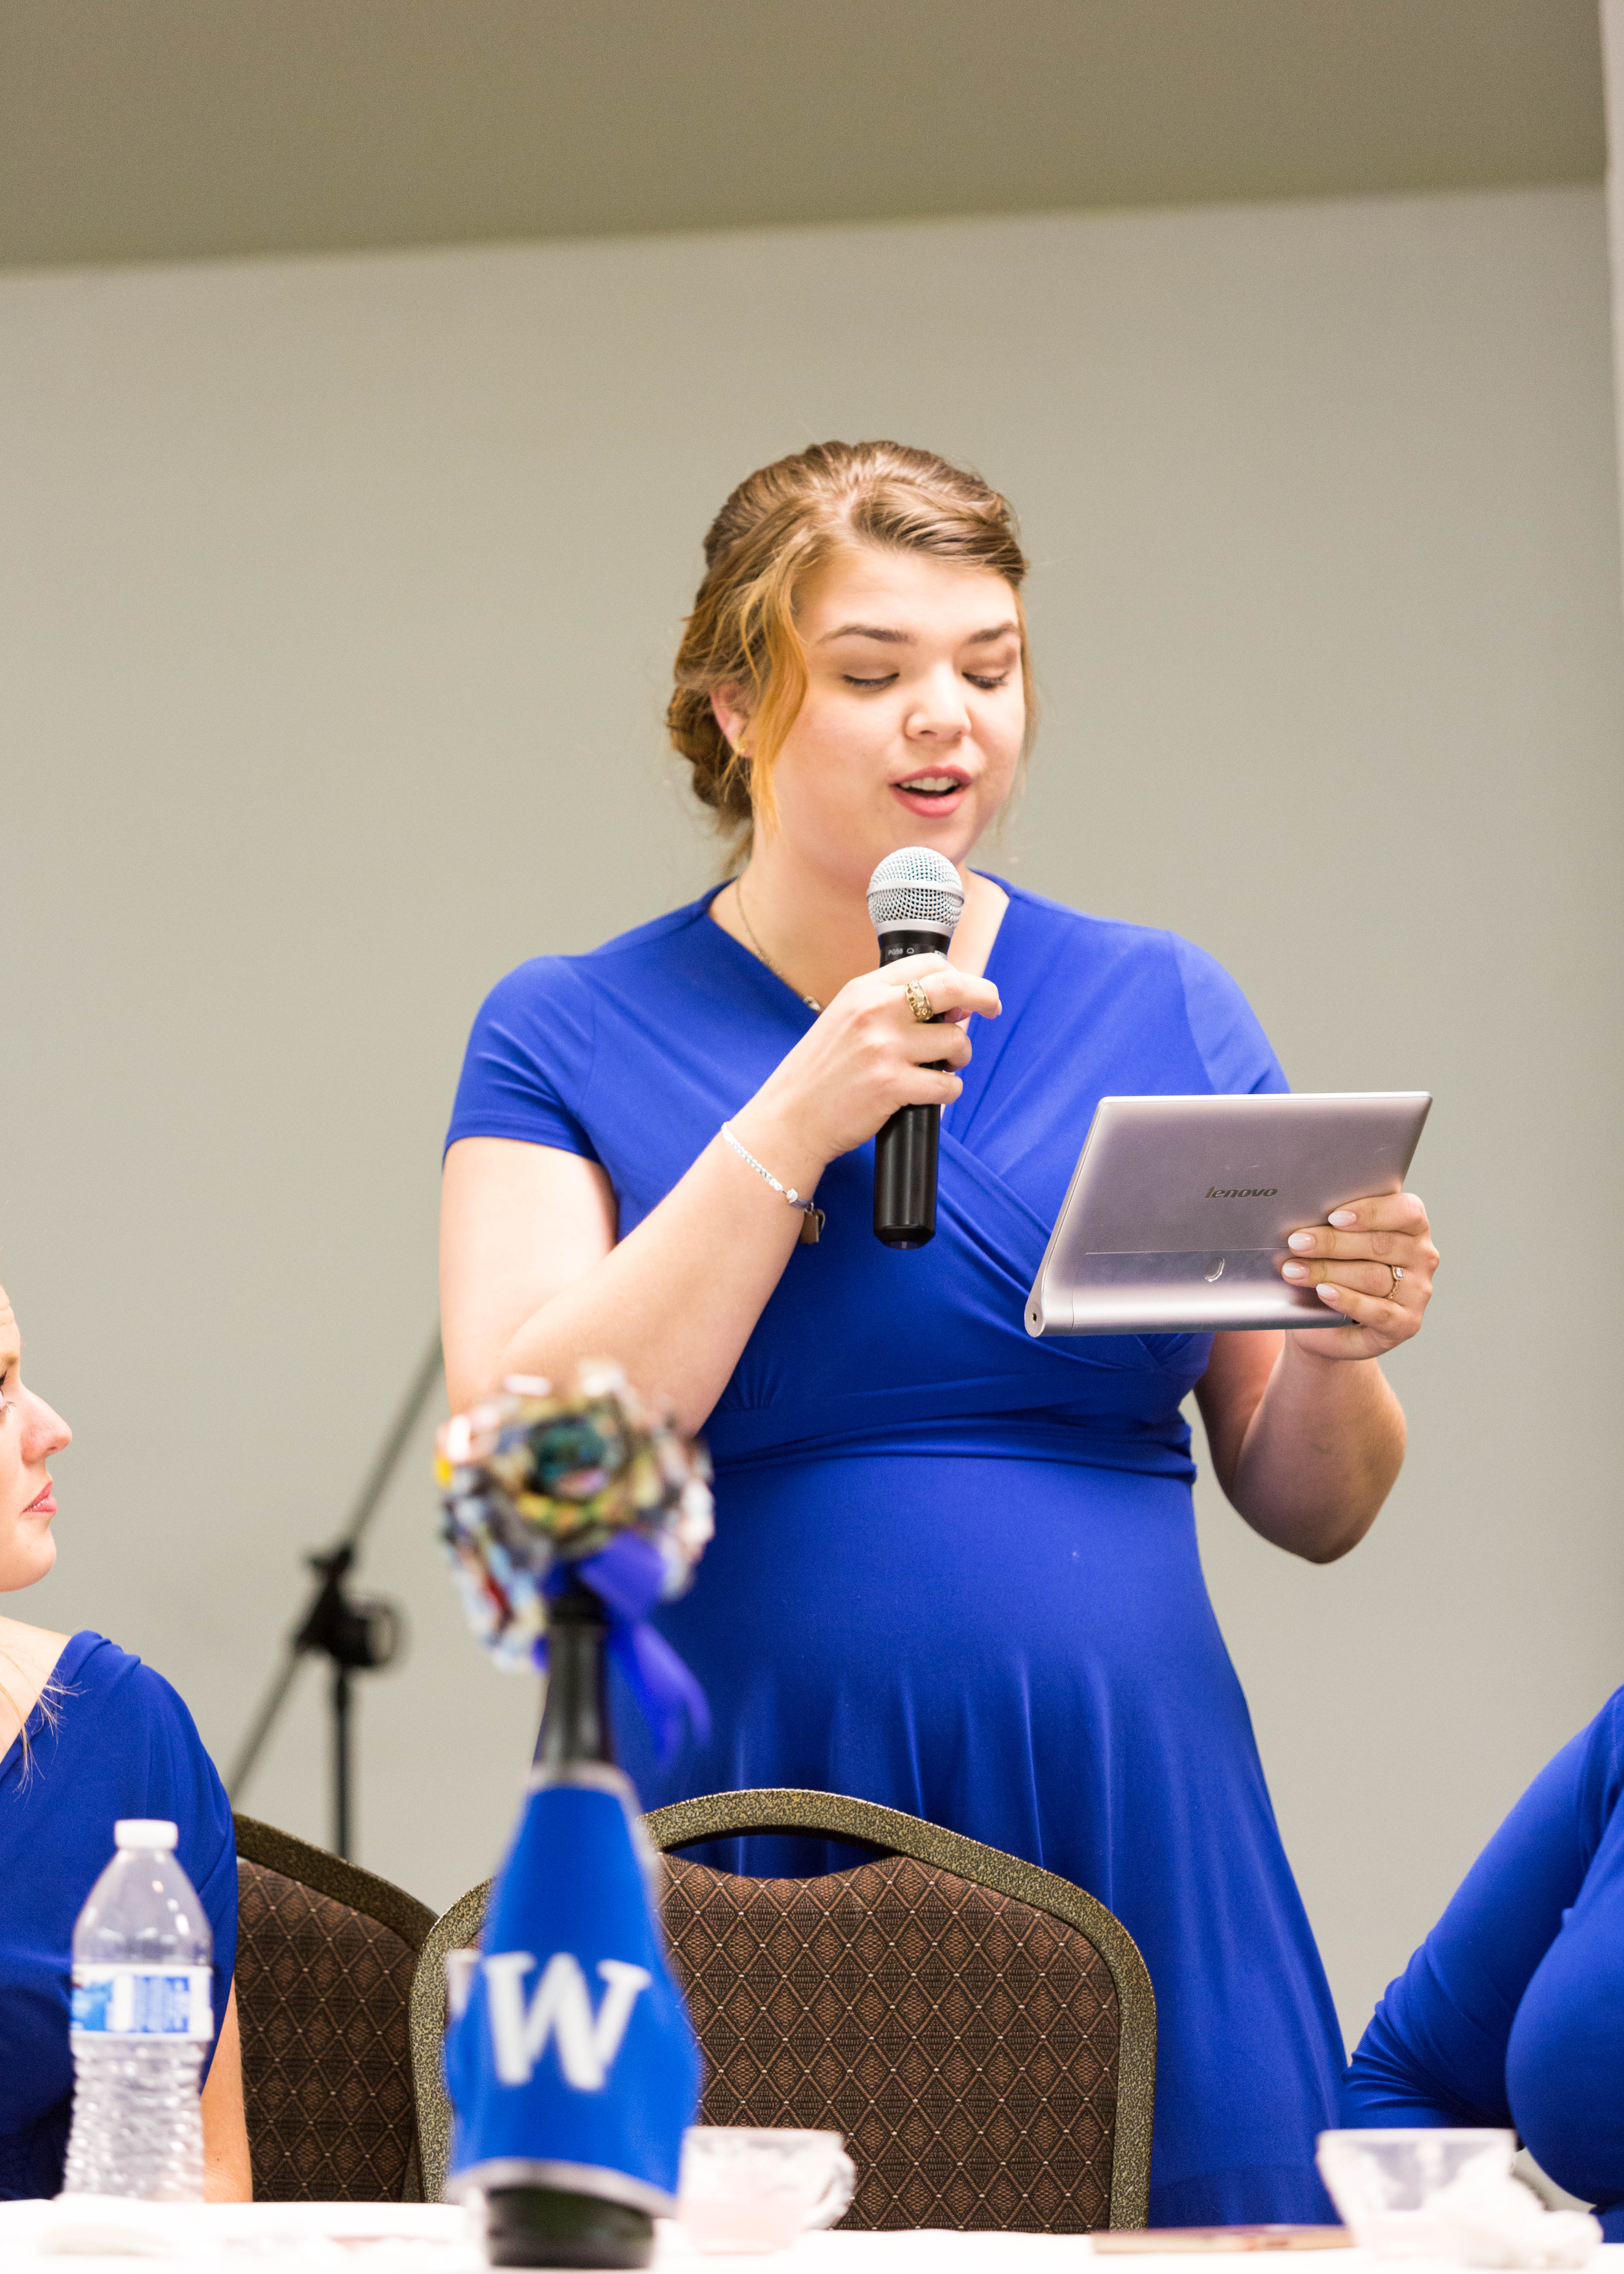 maid of honor in royal blue dress reads from notes during her speech